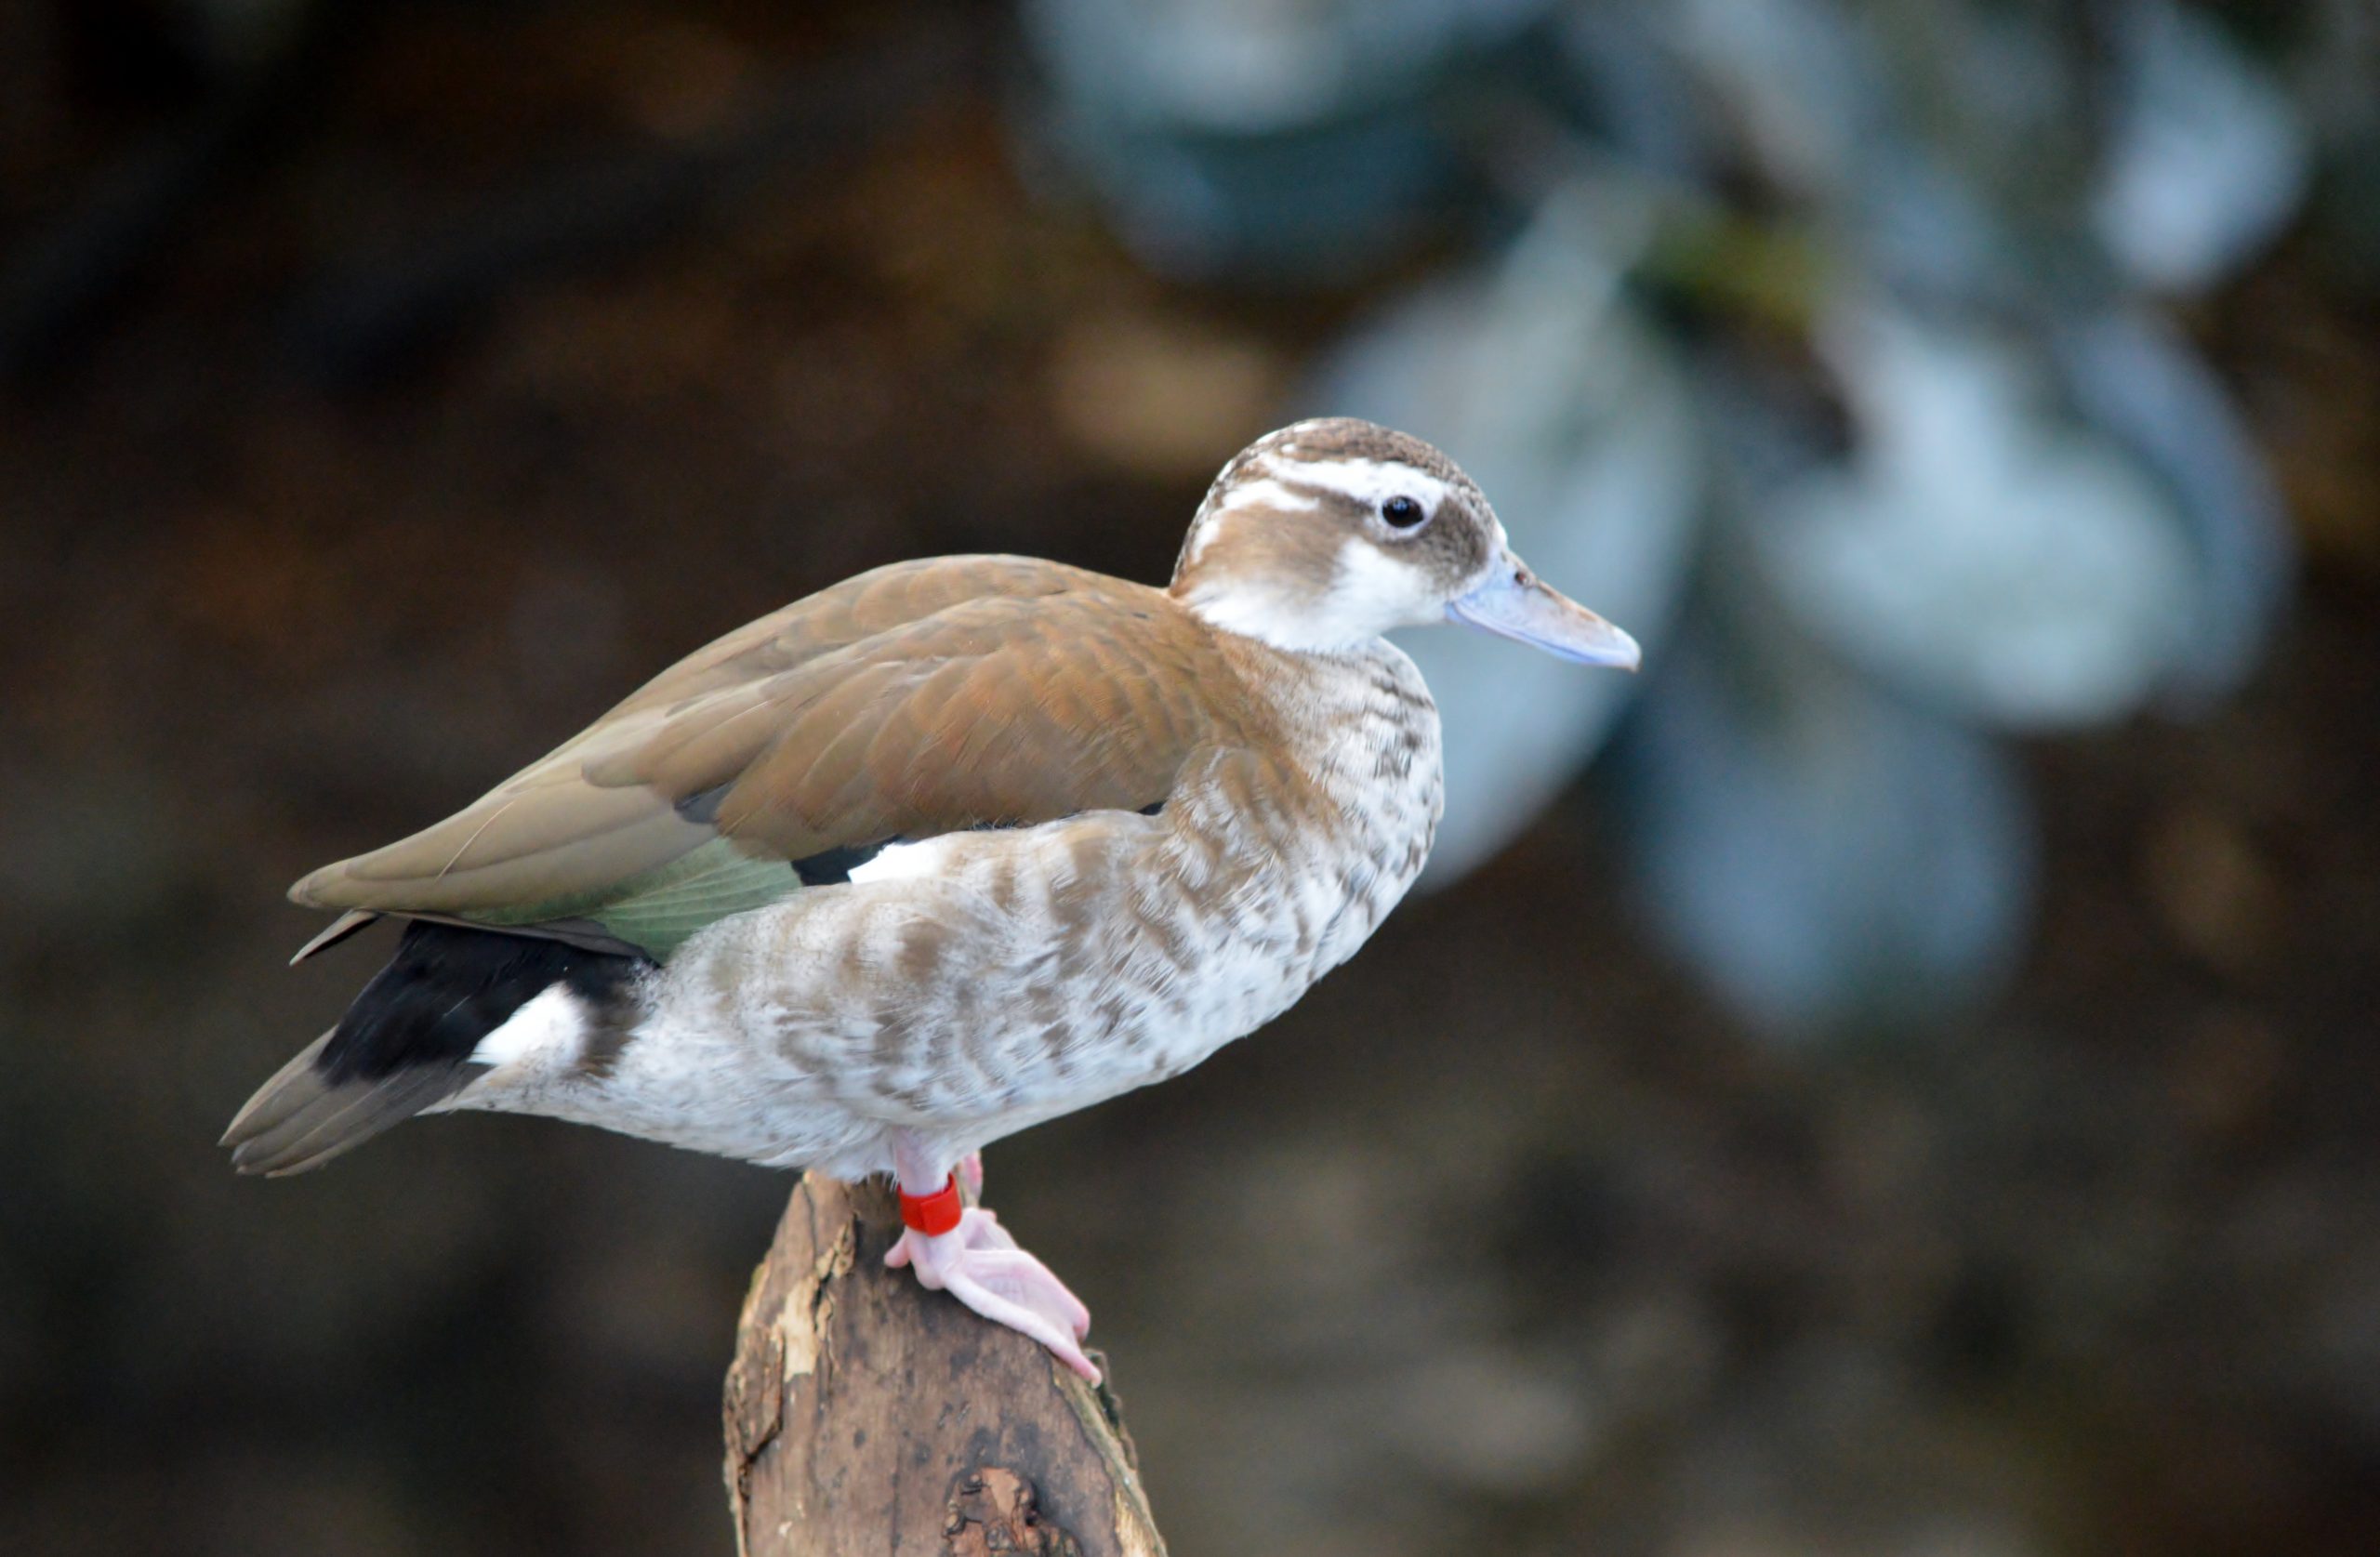 Female Ringed Teal perched on a wooden stump